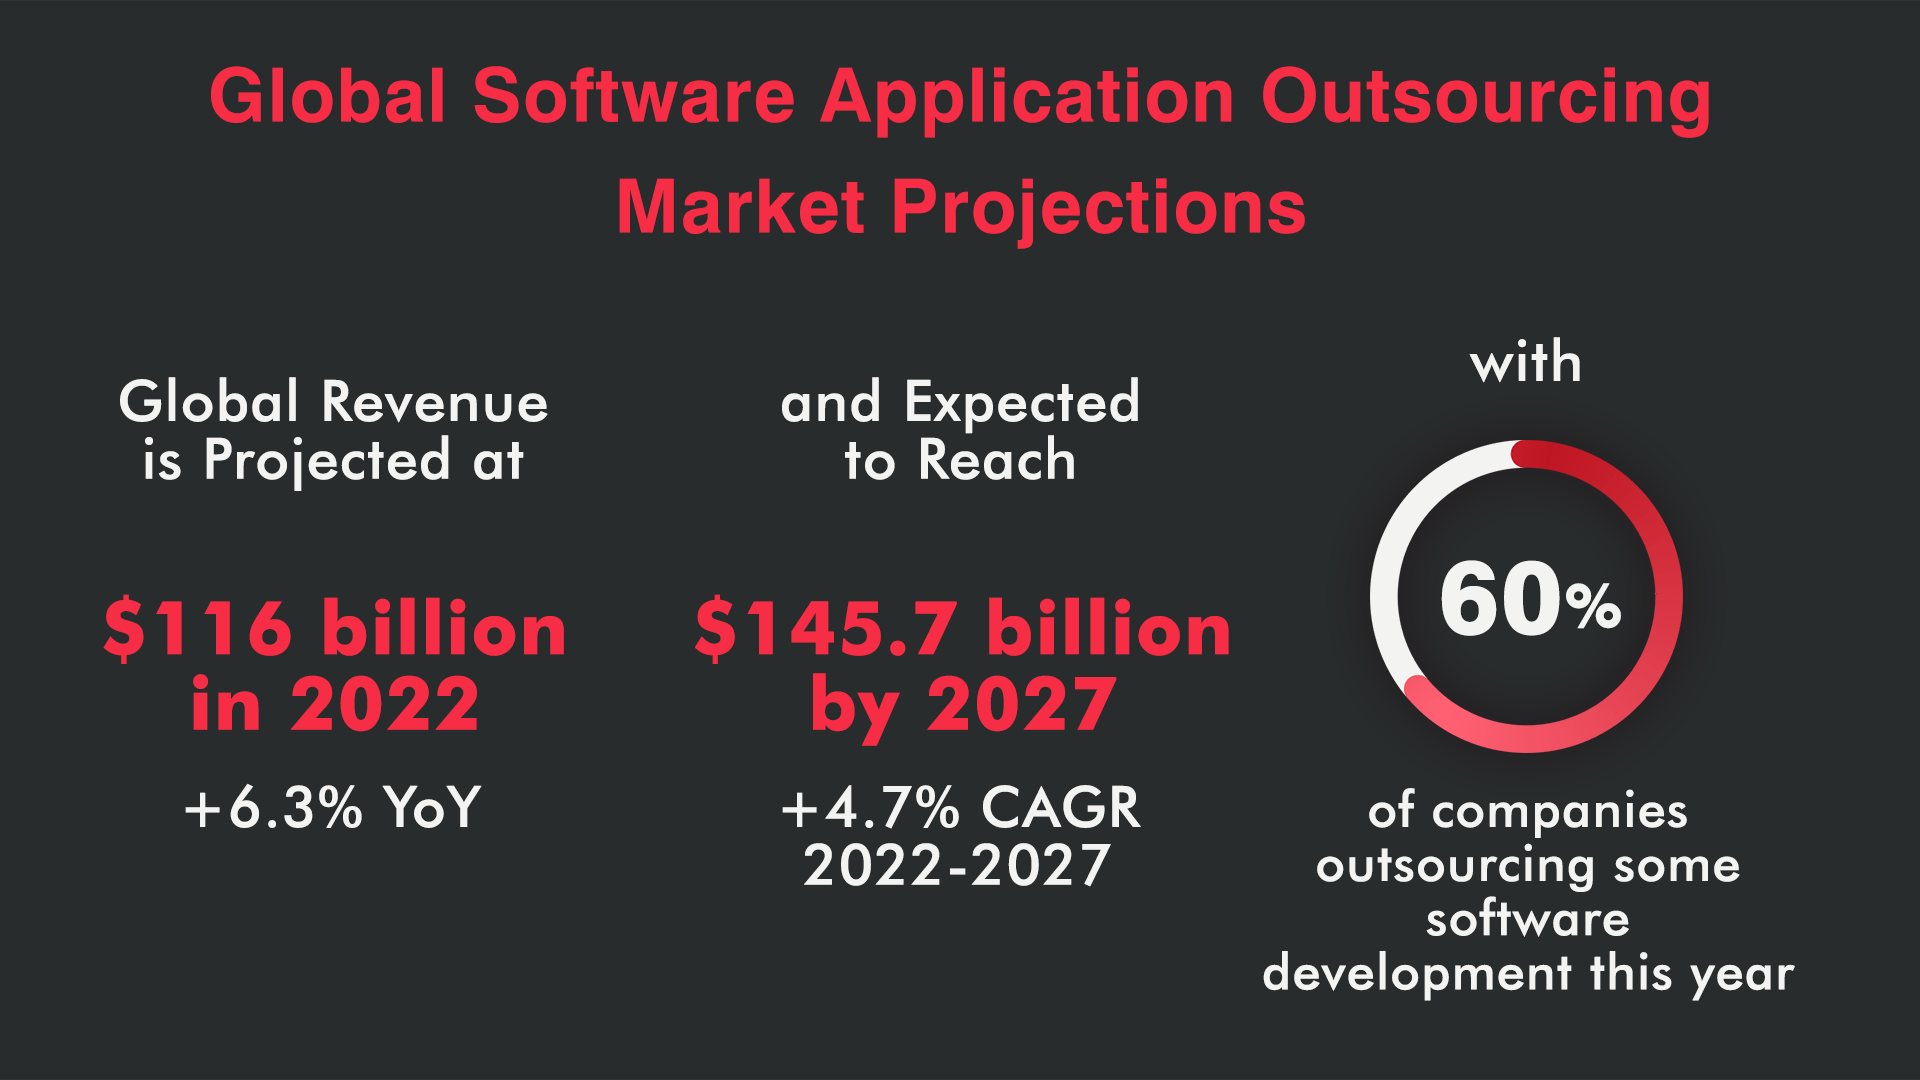 Global Software Application Outsourcing Market Projections